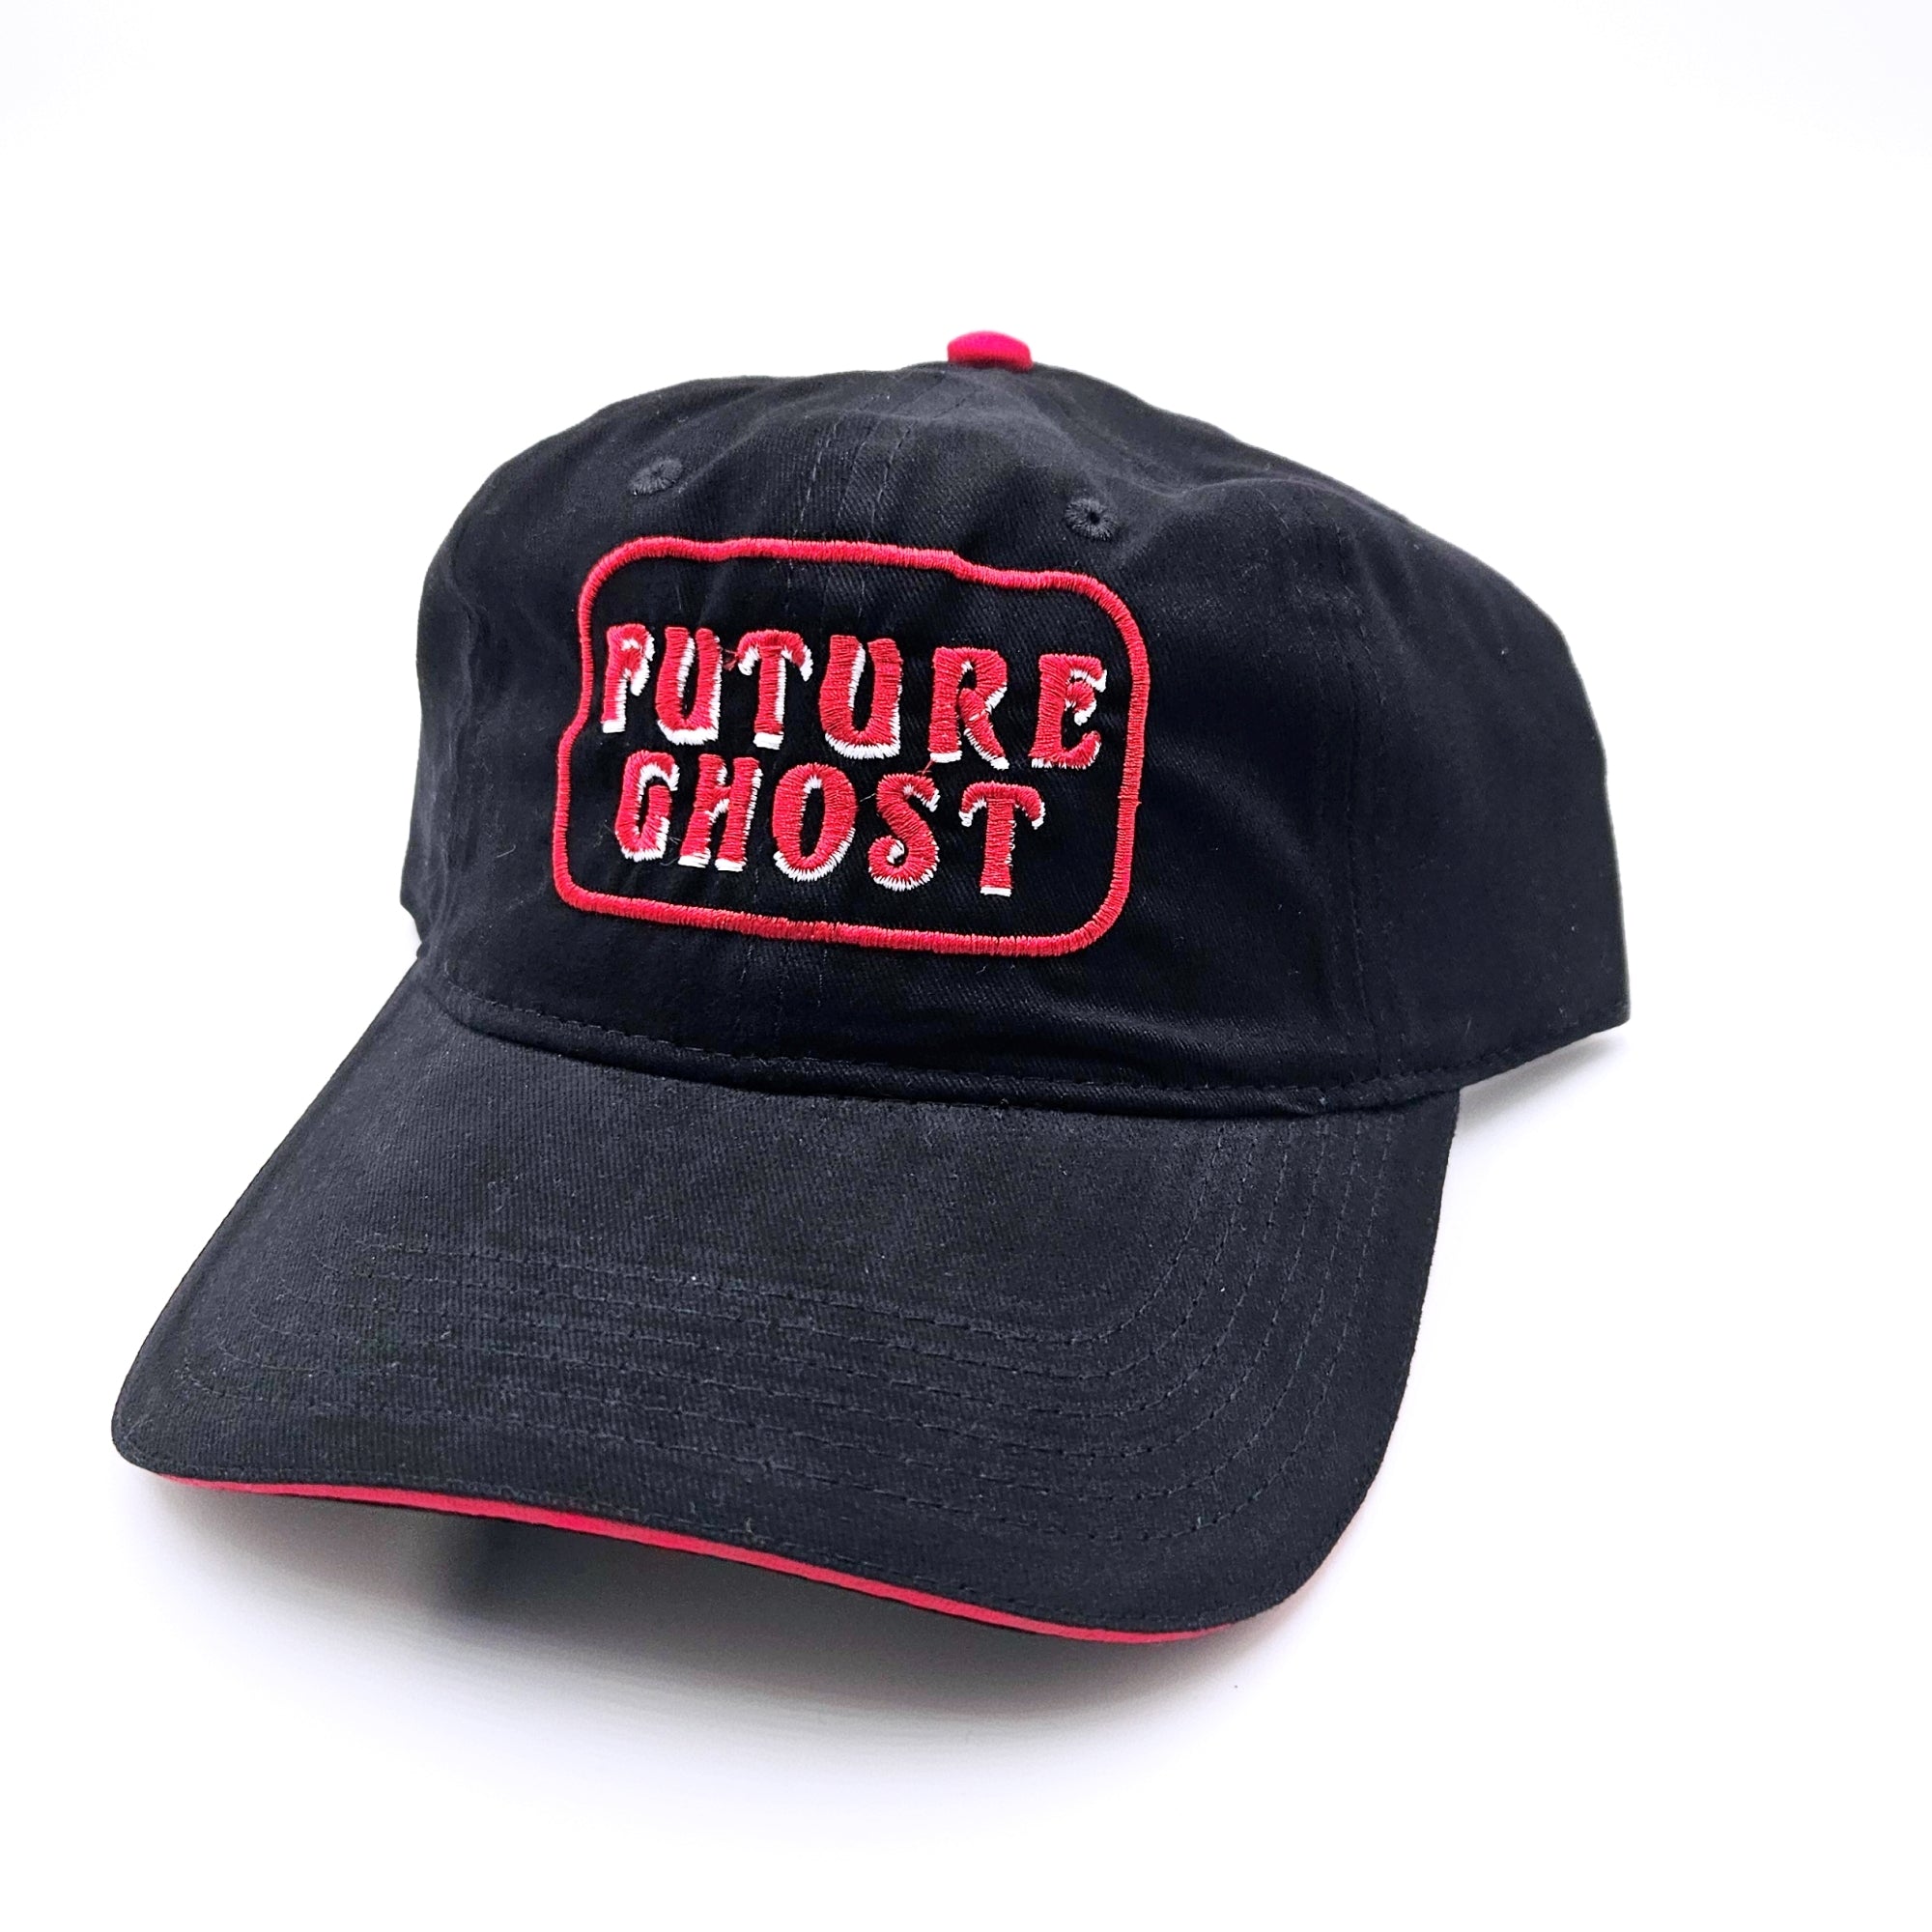 Future Ghost Black and Red Hat